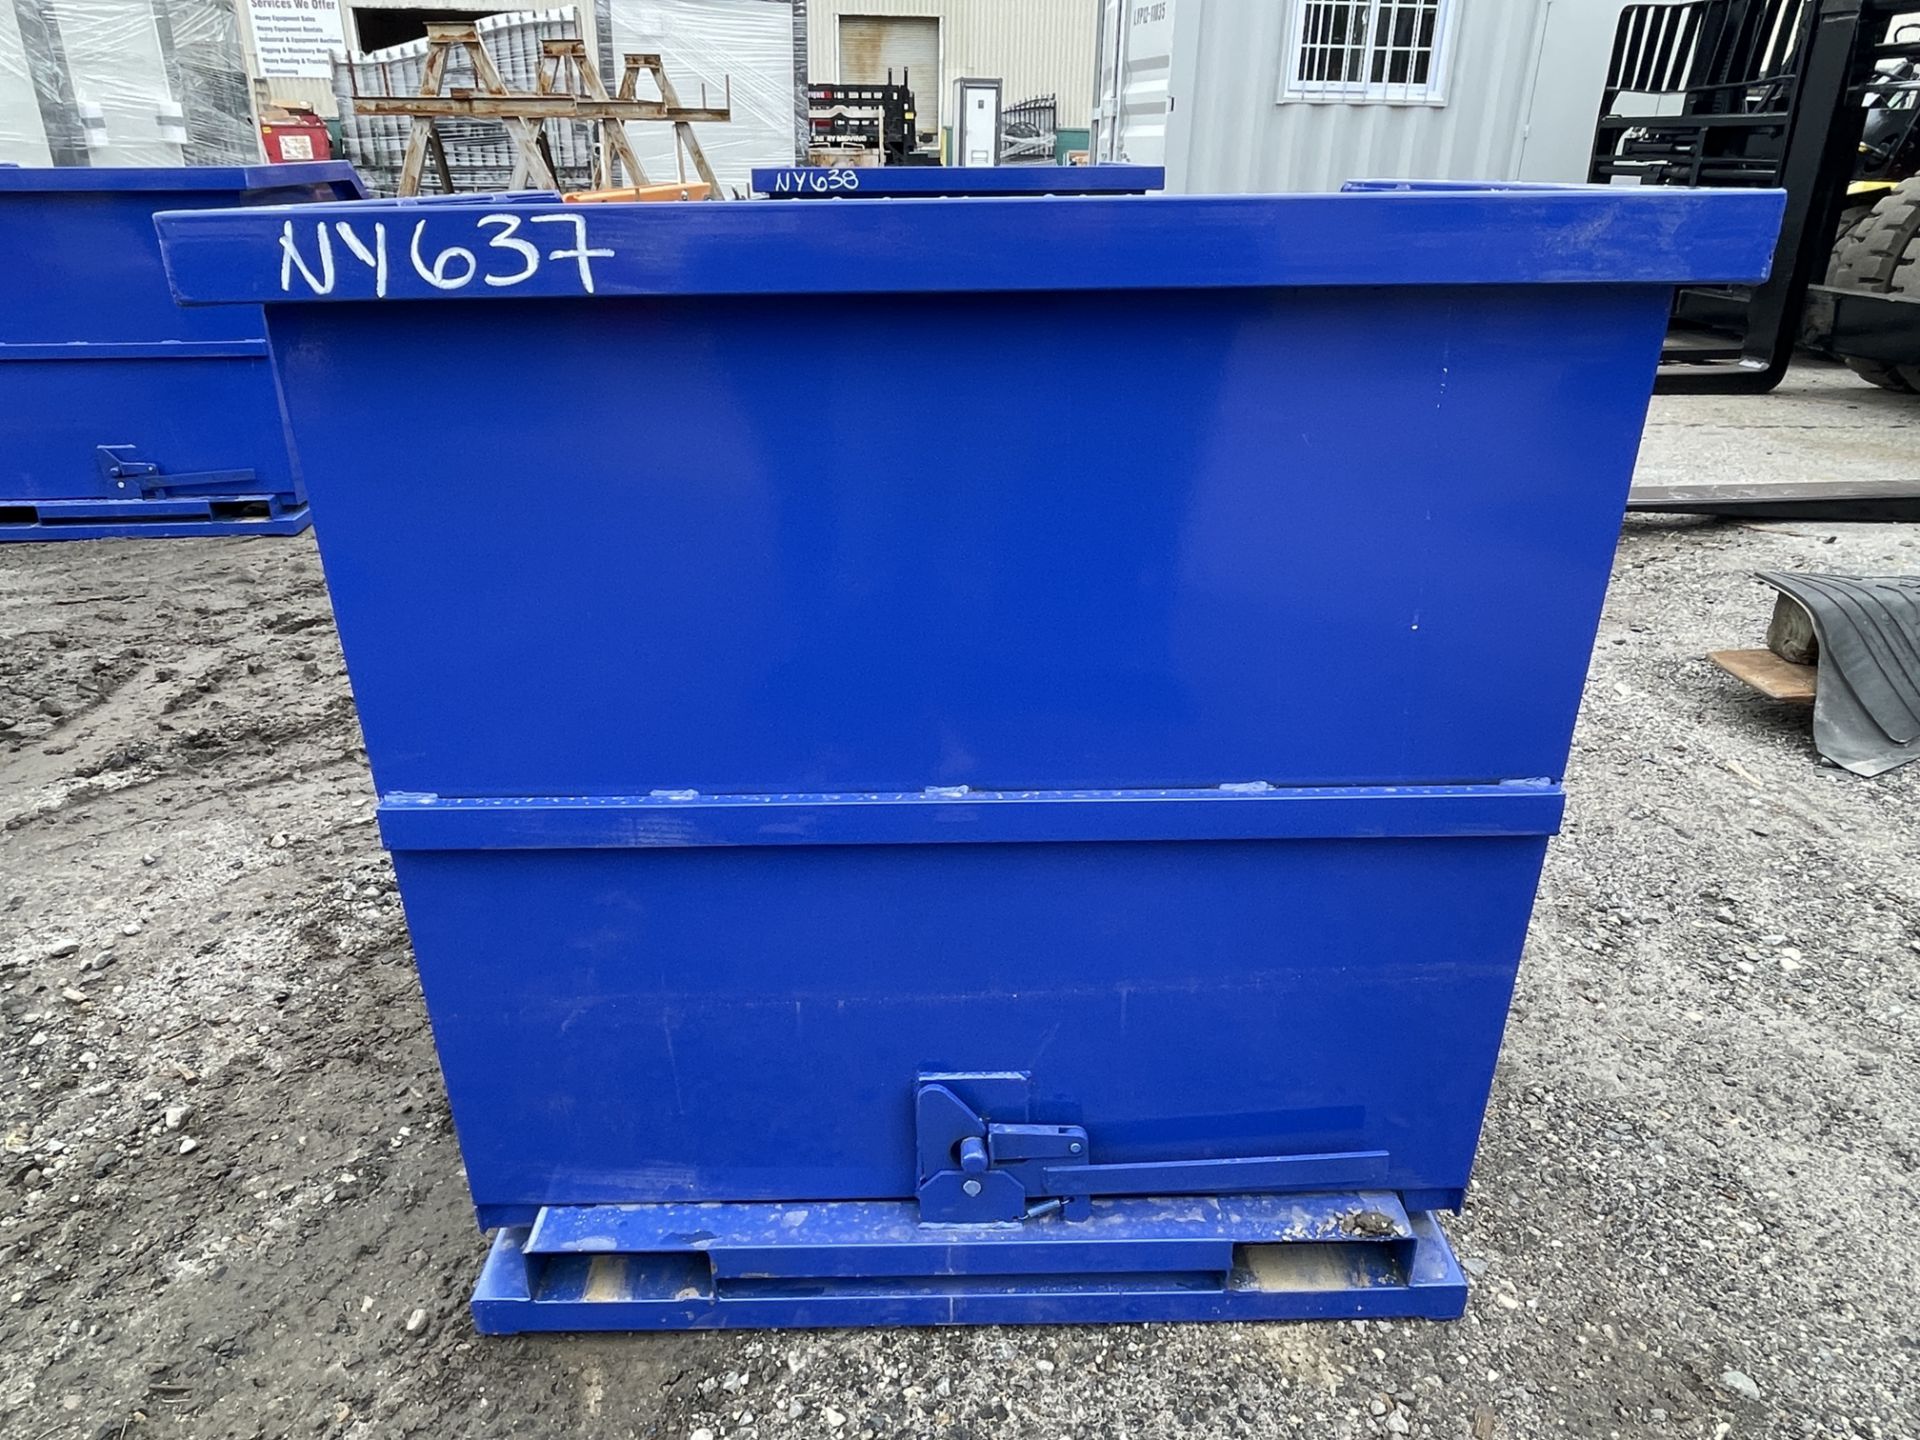 Brand New 1 Cubic Yard Self Dumping Hopper (NY637) - Image 4 of 5